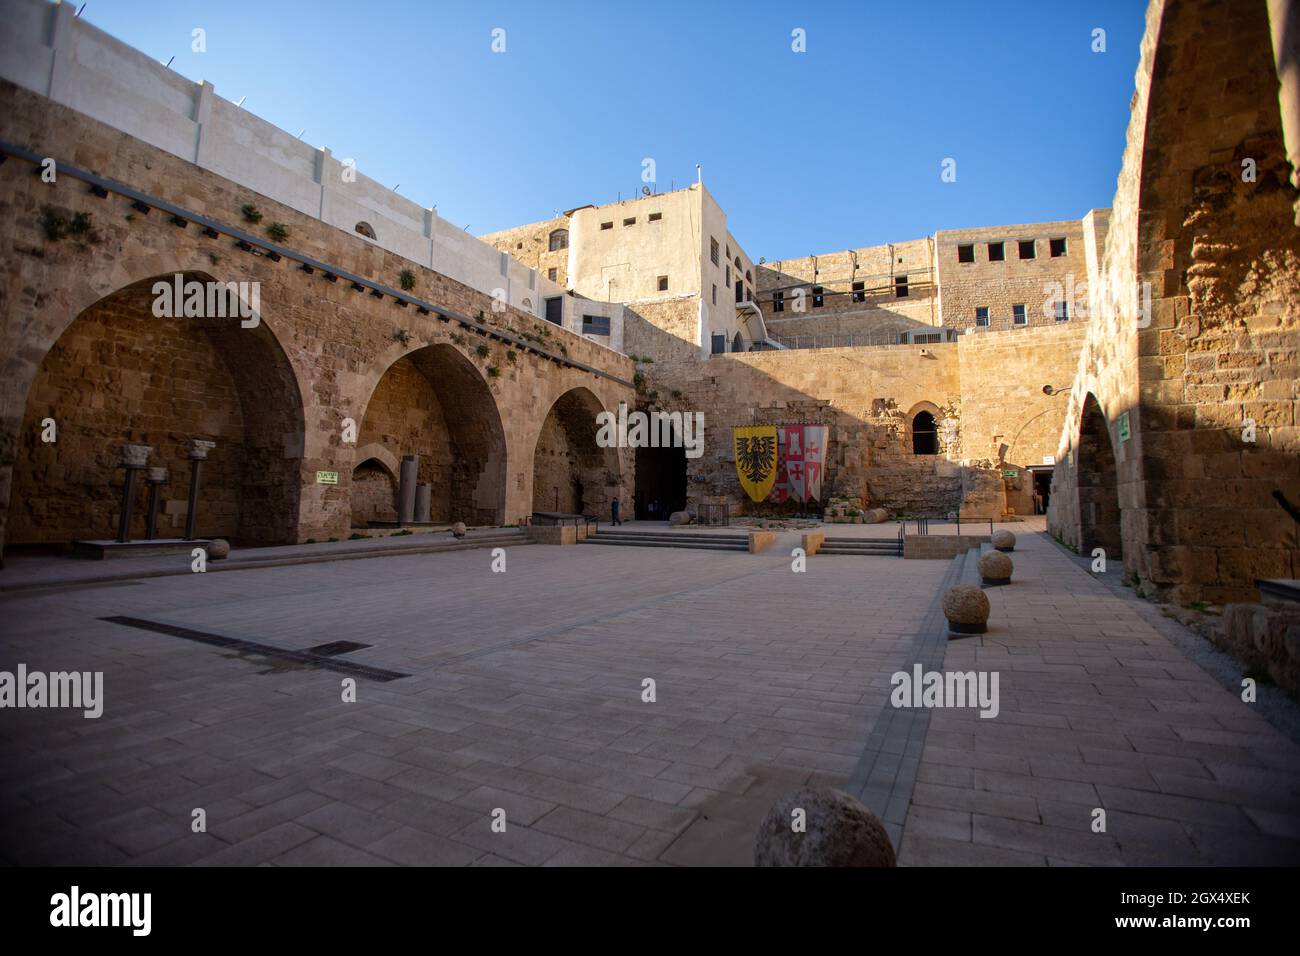 Crusaders' castle, Templar's castle in the historic district, Acre or Akko, UNESCO World Heritage Site, Israel, Middle East Stock Photo